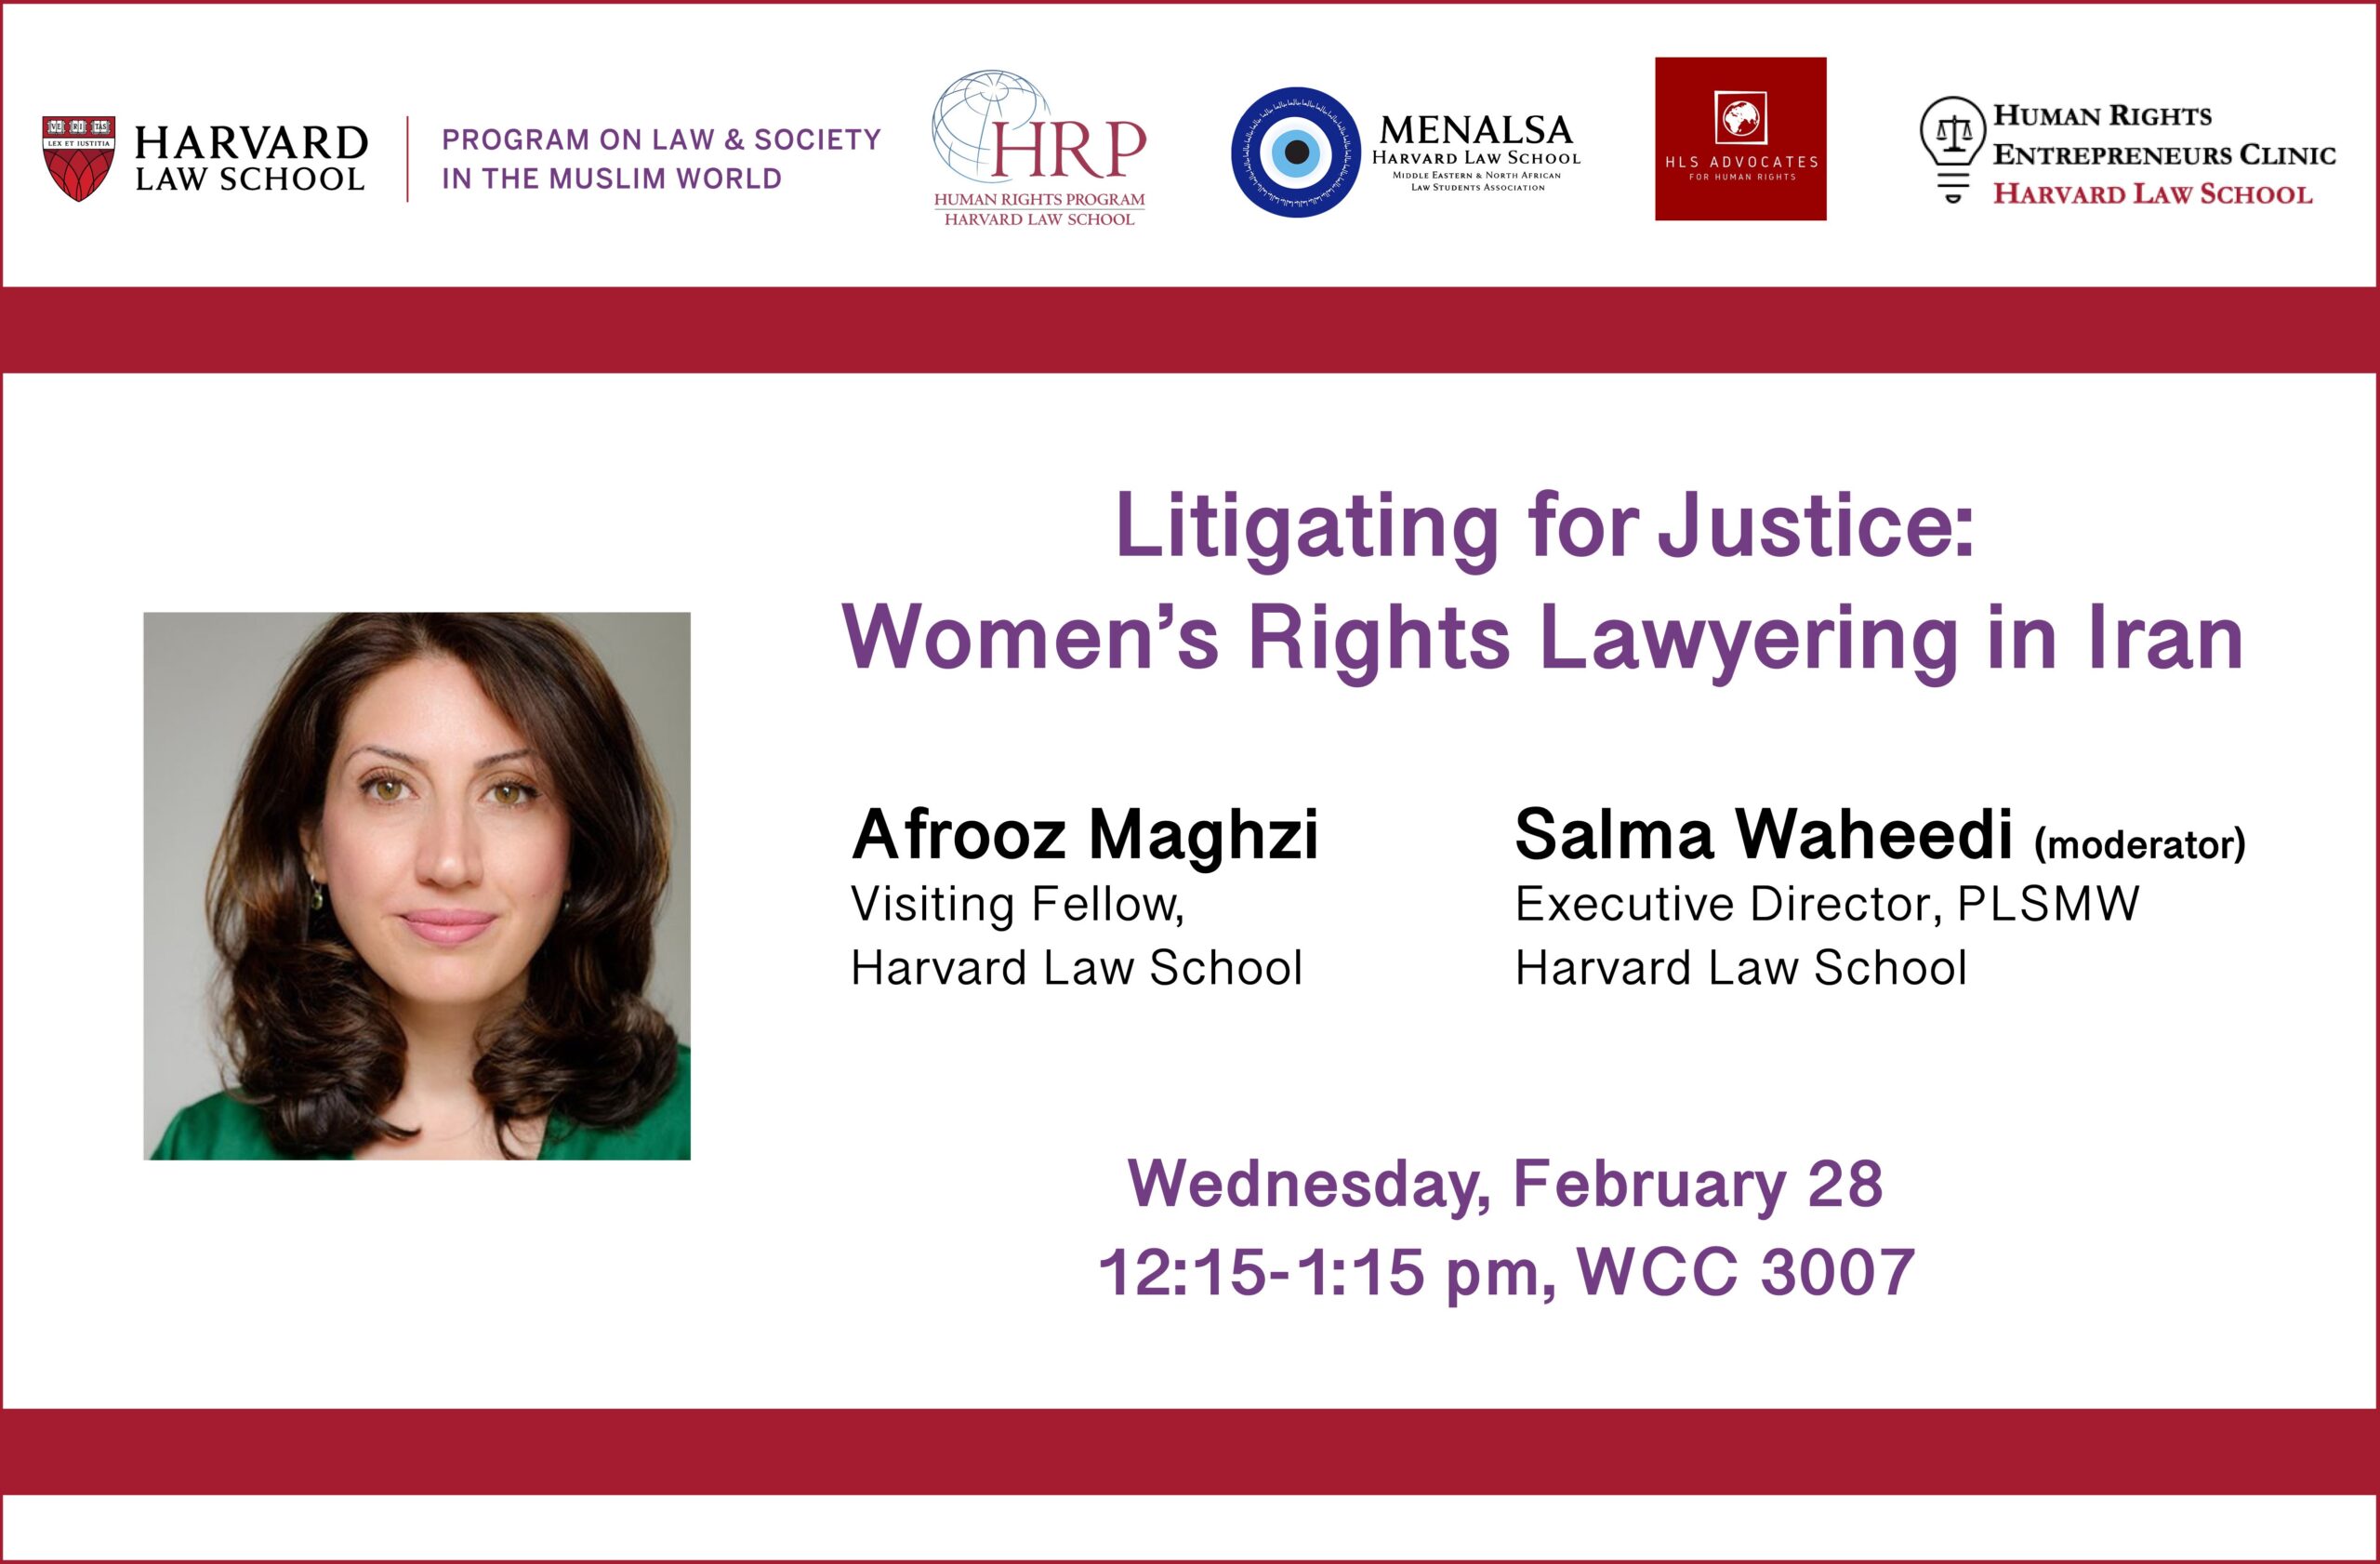 Banner for discussion "Litigating for Justice: Women's Rights Lawyering in Iran" on February 28 at 12:15 pm in WCC 3007.